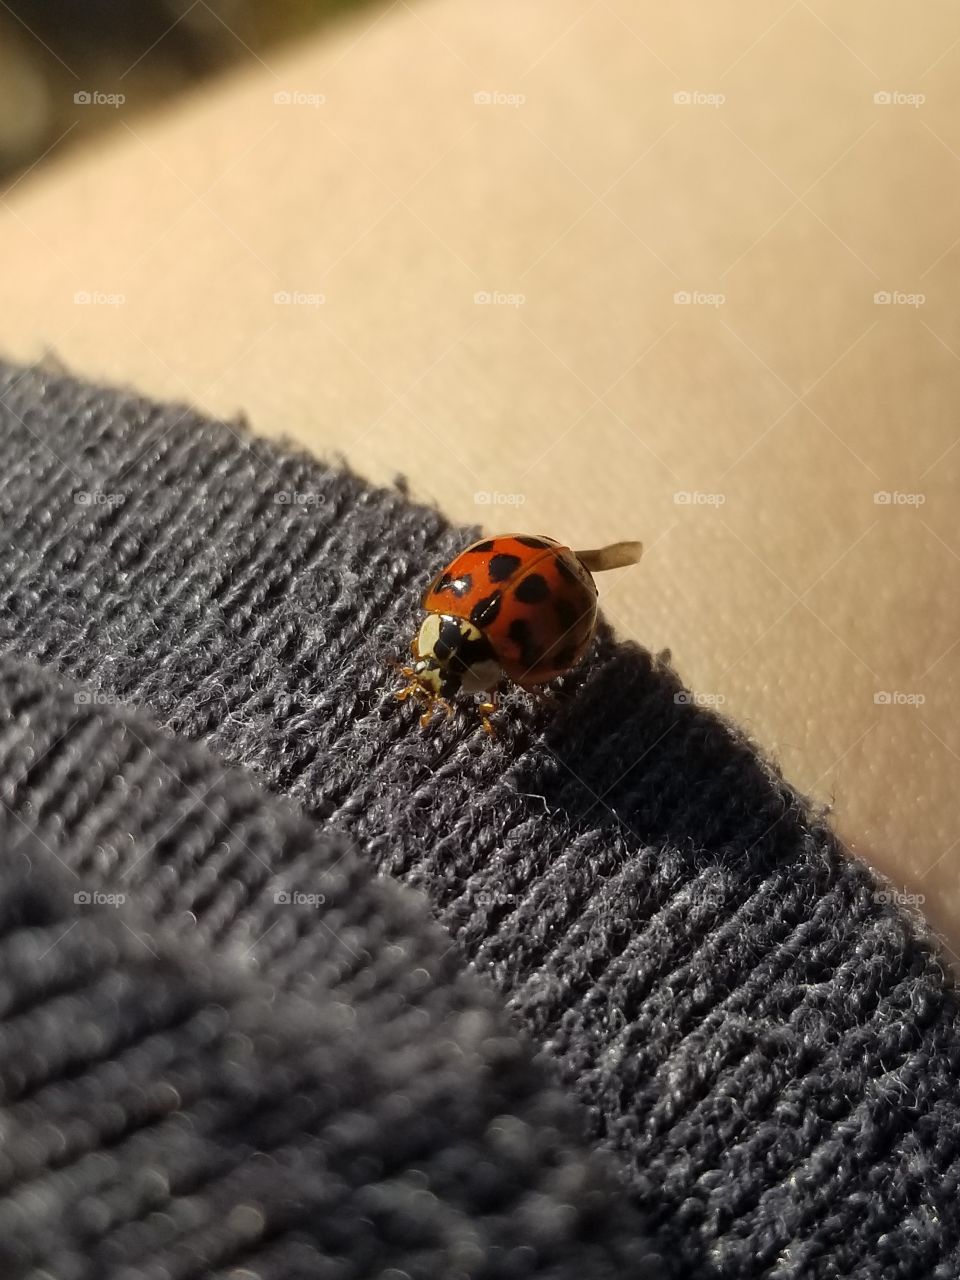 Ladybug lands on my arm, leaving me with good luck.